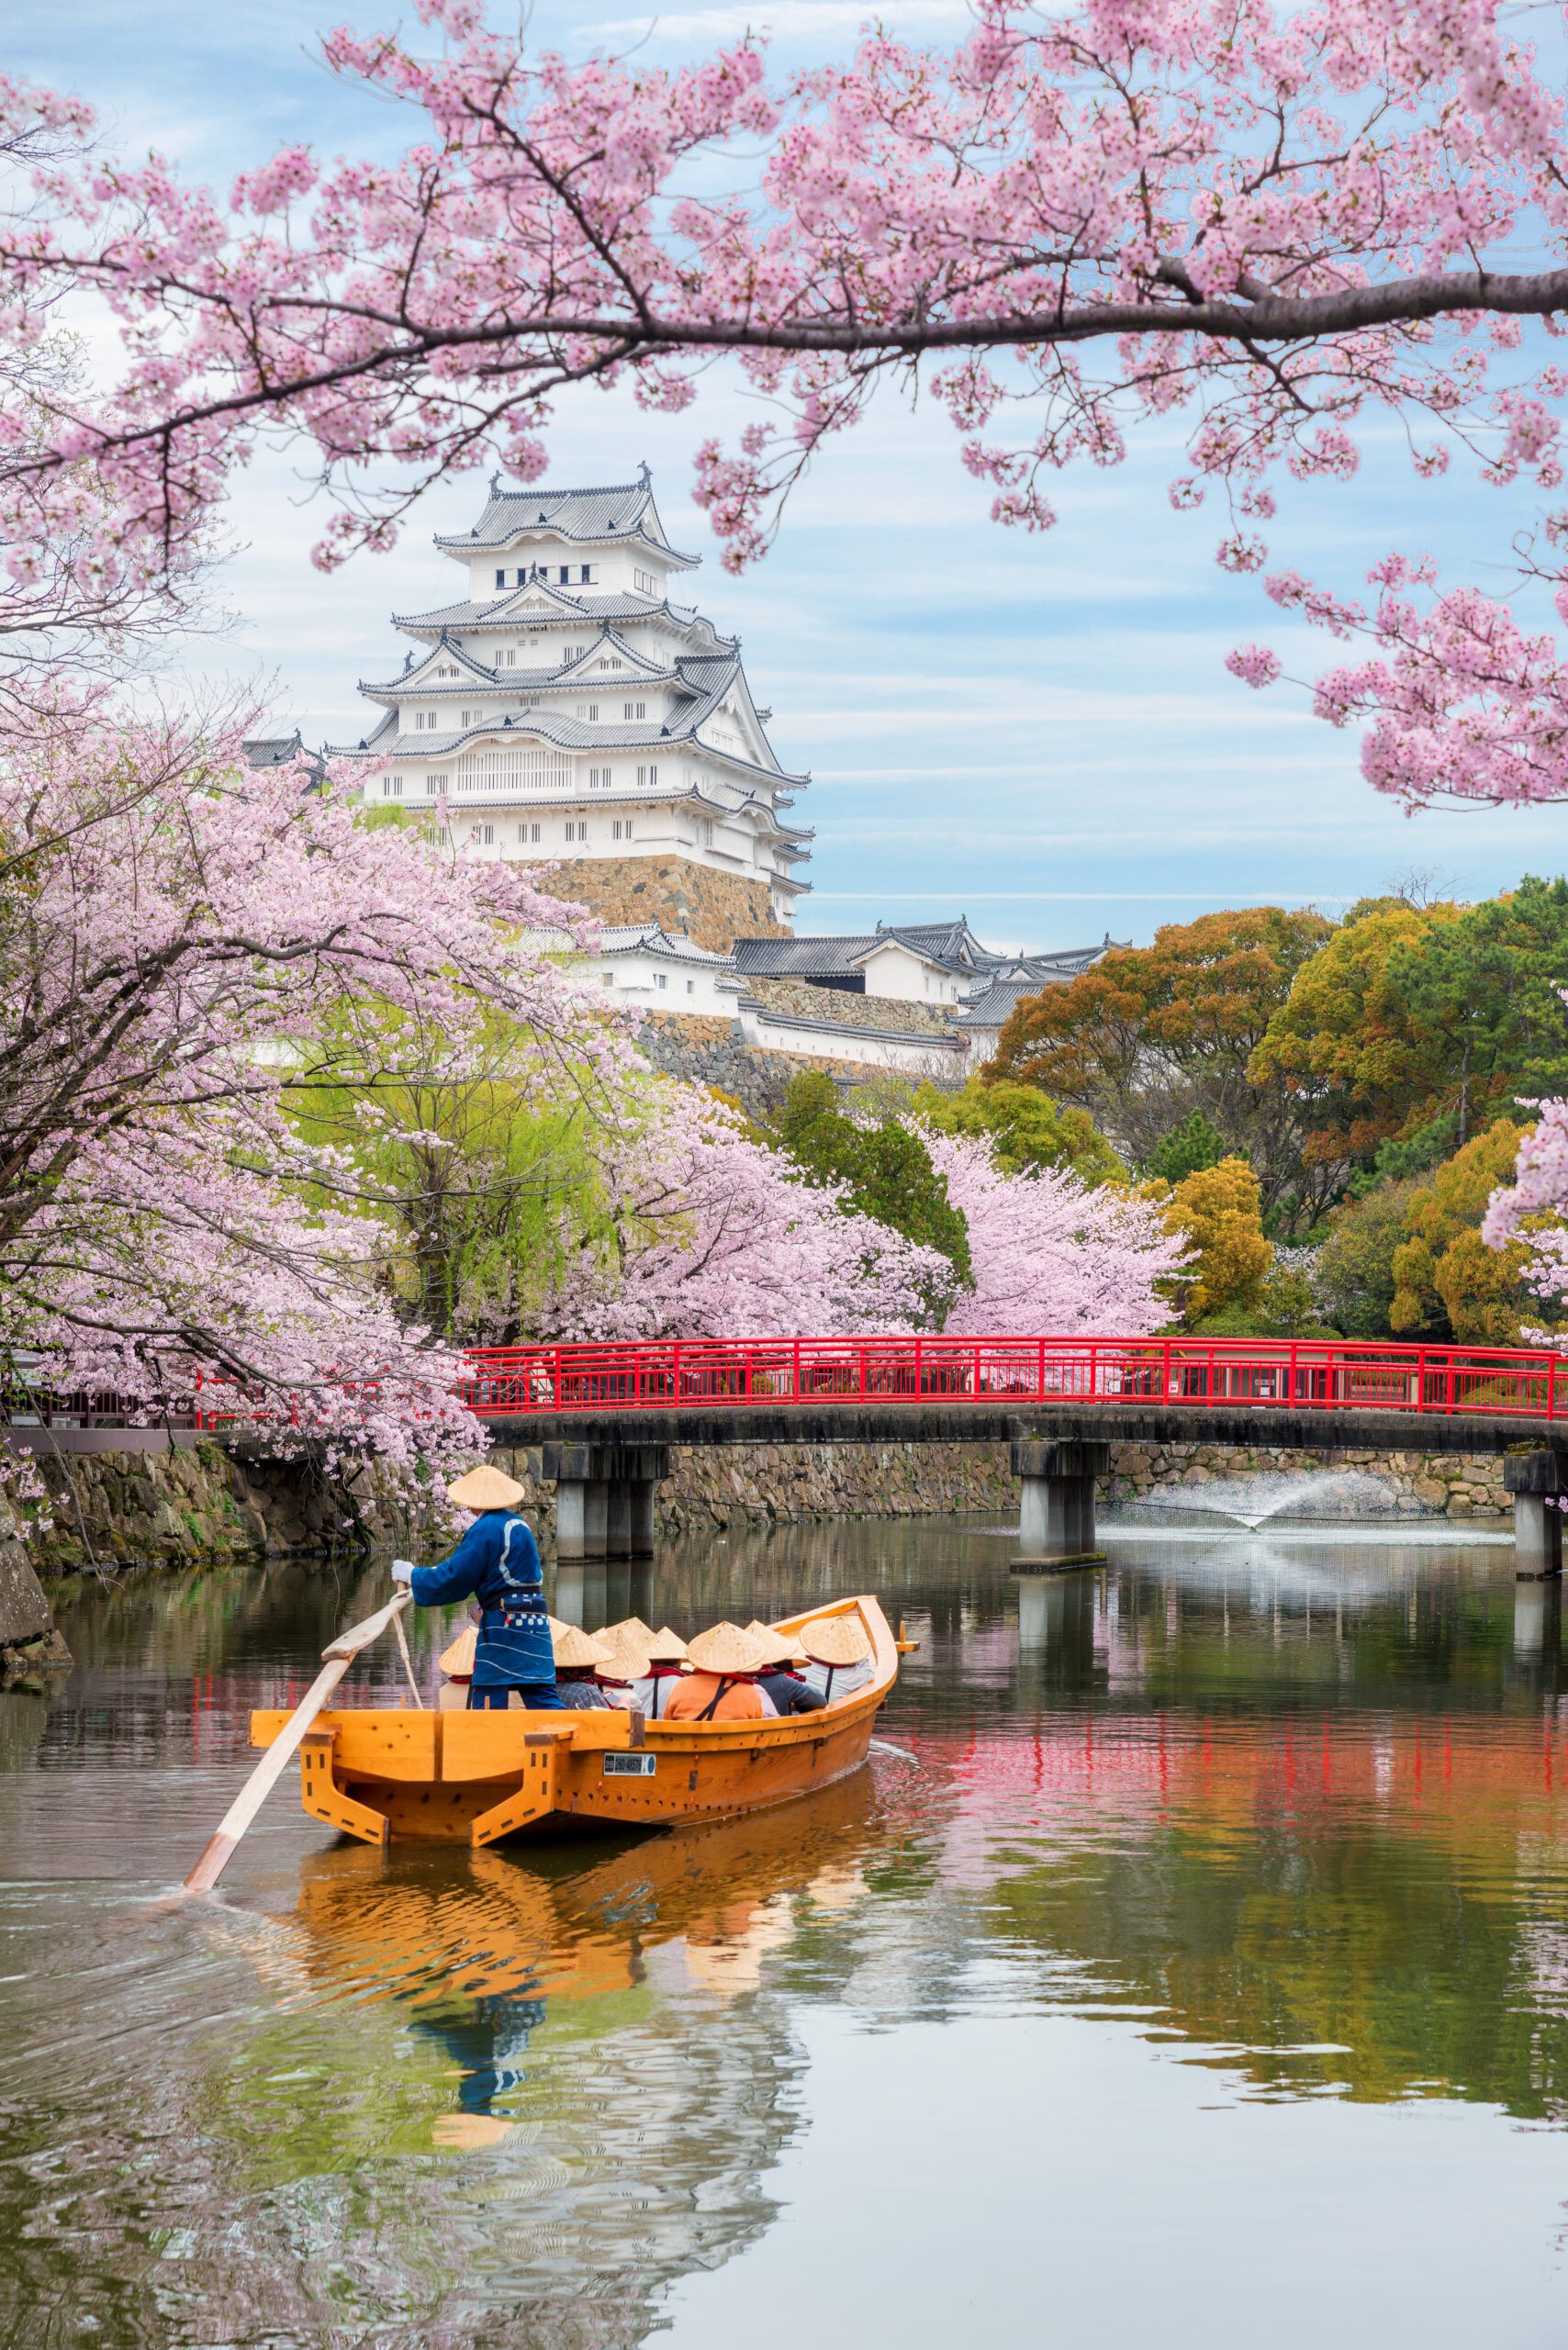 Himeji Castle with beautiful cherry blossom in spring season at